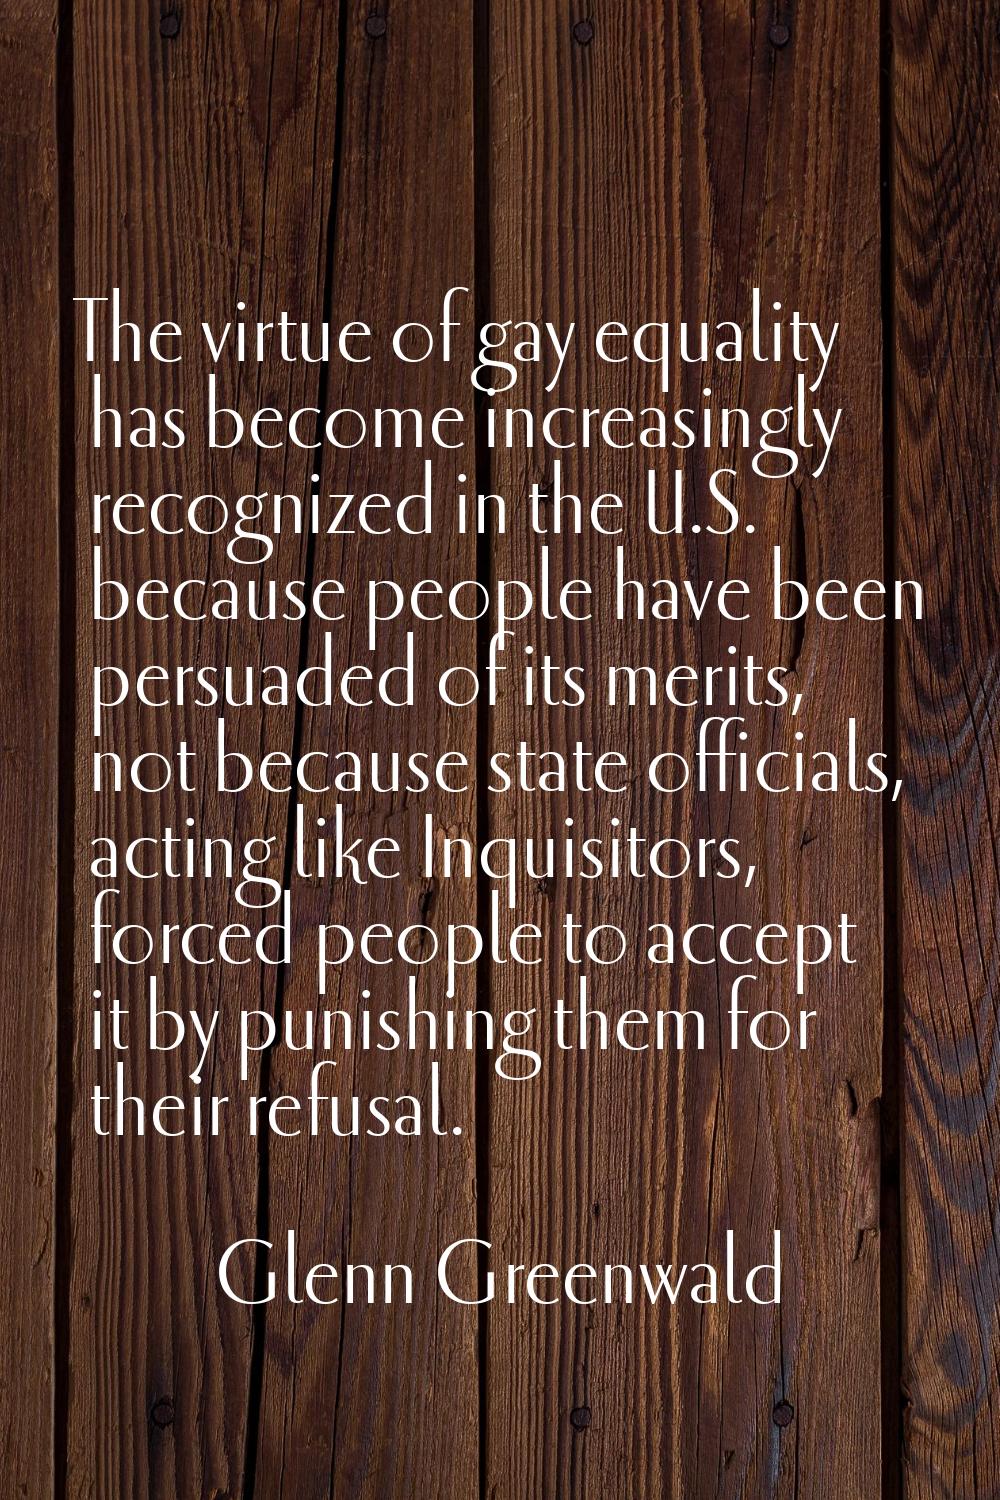 The virtue of gay equality has become increasingly recognized in the U.S. because people have been 